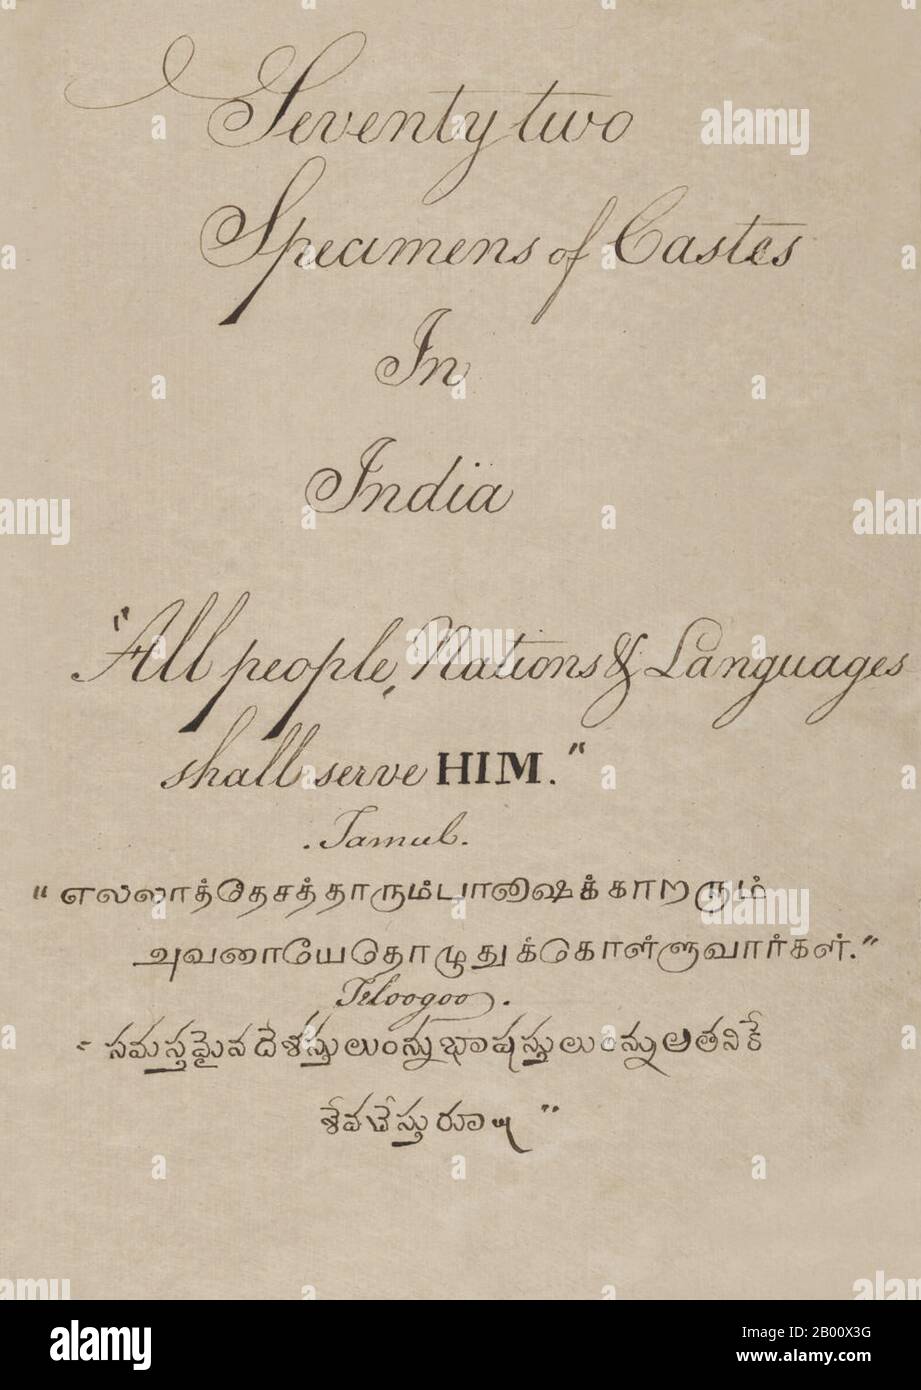 India: Title page of a manuscript volume entitled: ‘Seventy-Two Specimens of Caste in India’ (Madura, southern India: 1837).  The full manuscript consists of 72 full-color hand-painted images of men and women of the various castes and religious and ethnic groups found in Madura, Tamil Nadu, at that time. The book shows Indian dress and jewelry adornment in the Madura region as they appeared before the onset of Western influences on South Asian dress and style. Each illustrated portrait is captioned in English and in Tamil, and the title page of the work includes English, Tamil, and Telugu. Stock Photo